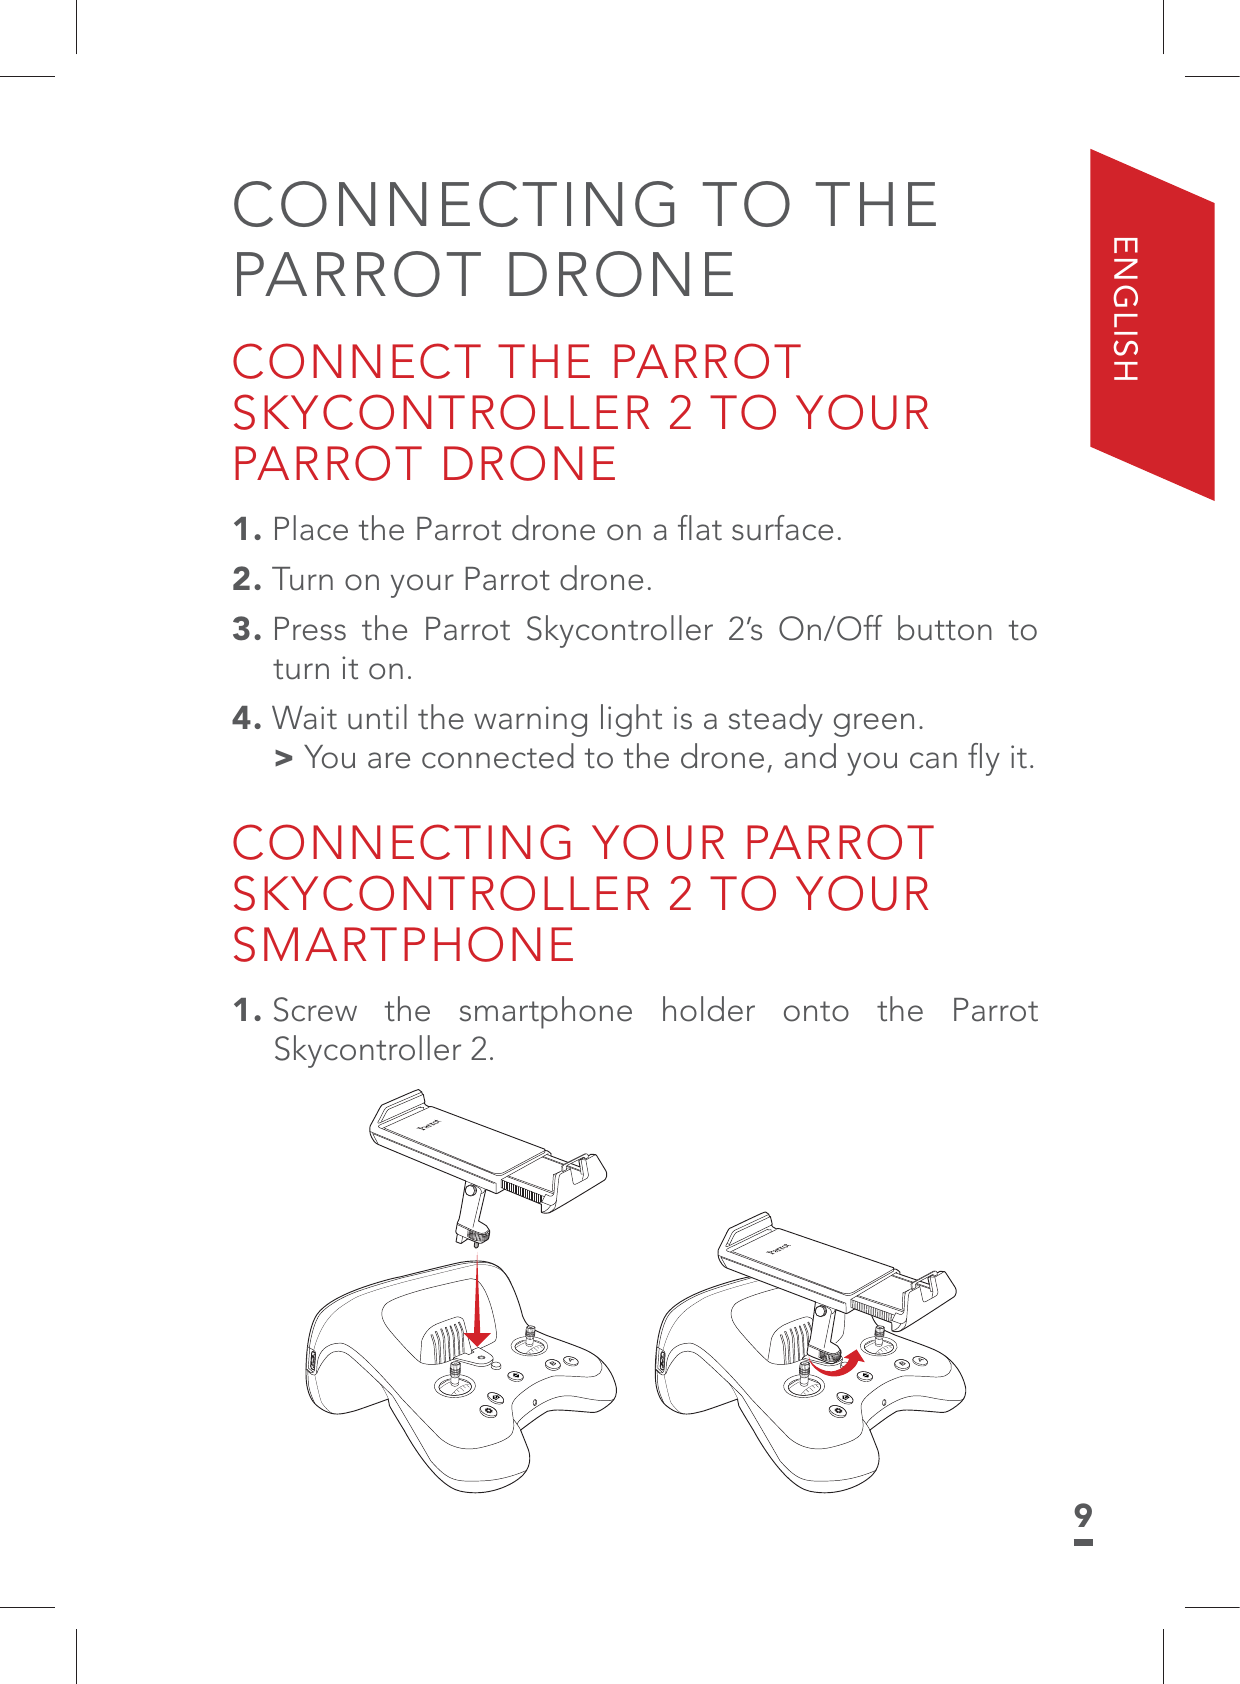 9ENGLISHCONNECTING TO THE PARROT DRONECONNECT THE PARROT SKYCONTROLLER 2 TO YOUR PARROT DRONE1. Place the Parrot drone on a ﬂat surface.2. Turn on your Parrot drone.3. Press the Parrot Skycontroller 2’s On/Off button to turn it on.4. Wait until the warning light is a steady green. &gt;You are connected to the drone, and you can ﬂy it.CONNECTING YOUR PARROT SKYCONTROLLER 2 TO YOUR SMARTPHONE1. Screw the smartphone holder onto the Parrot Skycontroller 2.BABA